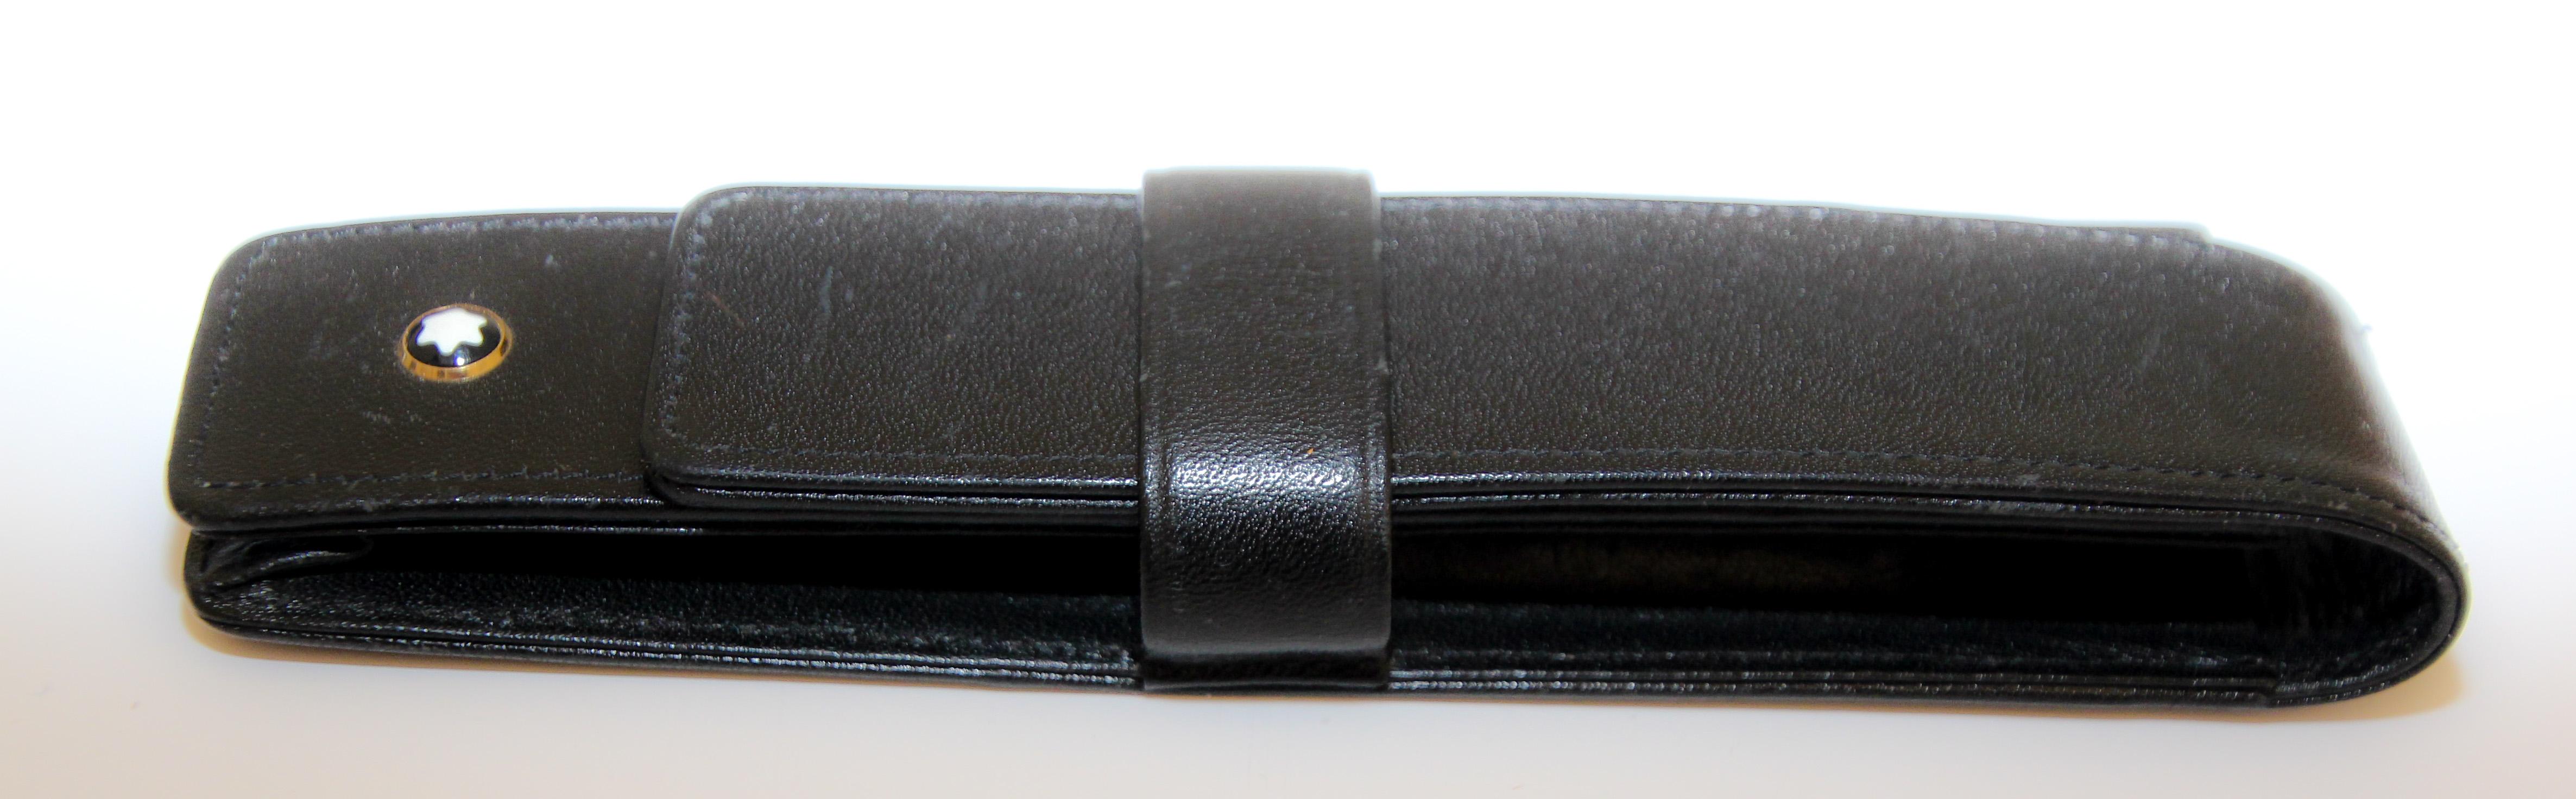 Vintage Montblanc Meisterstuck black Pen Pouch for one writing Instrument.
Montblanc Meisterstuck Series of leather goods, German, full-grain calfskin in unique, deep-gloss Montblanc. black, with Montblanc Metal fittings /logo: Black and white